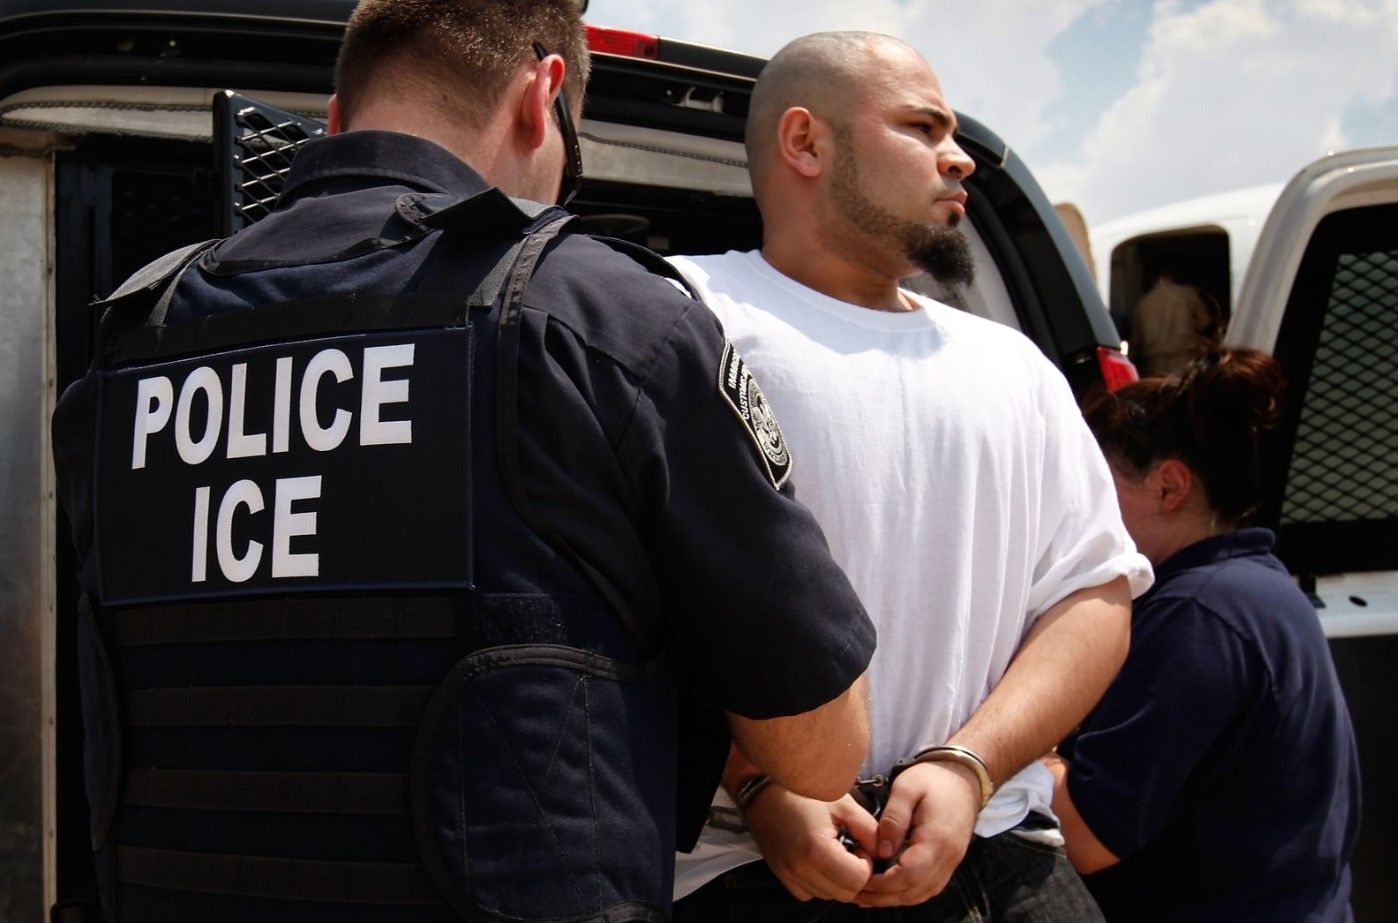 7th Circuit rules Kankakee and McHenry Counties must end ICE contracts